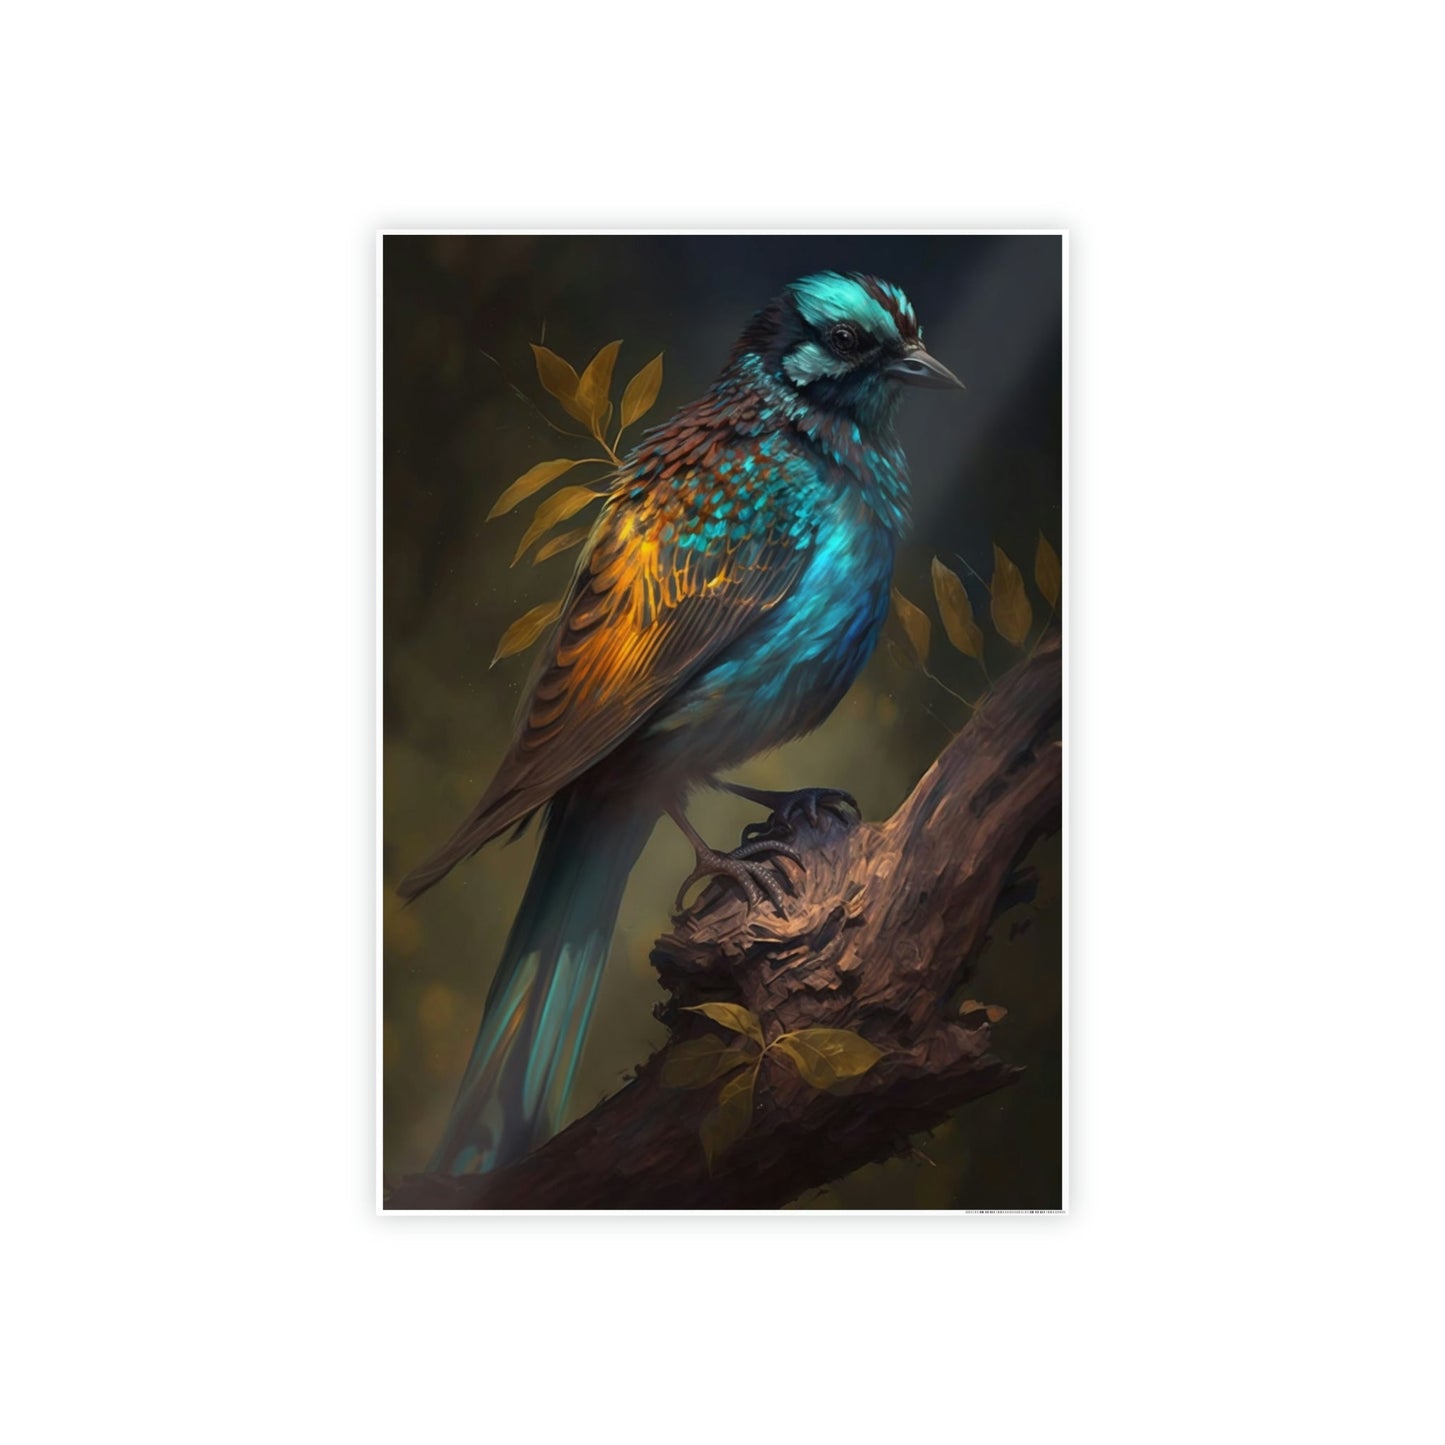 The Majestic Birds: A Framed Canvas & Poster Print of Birds